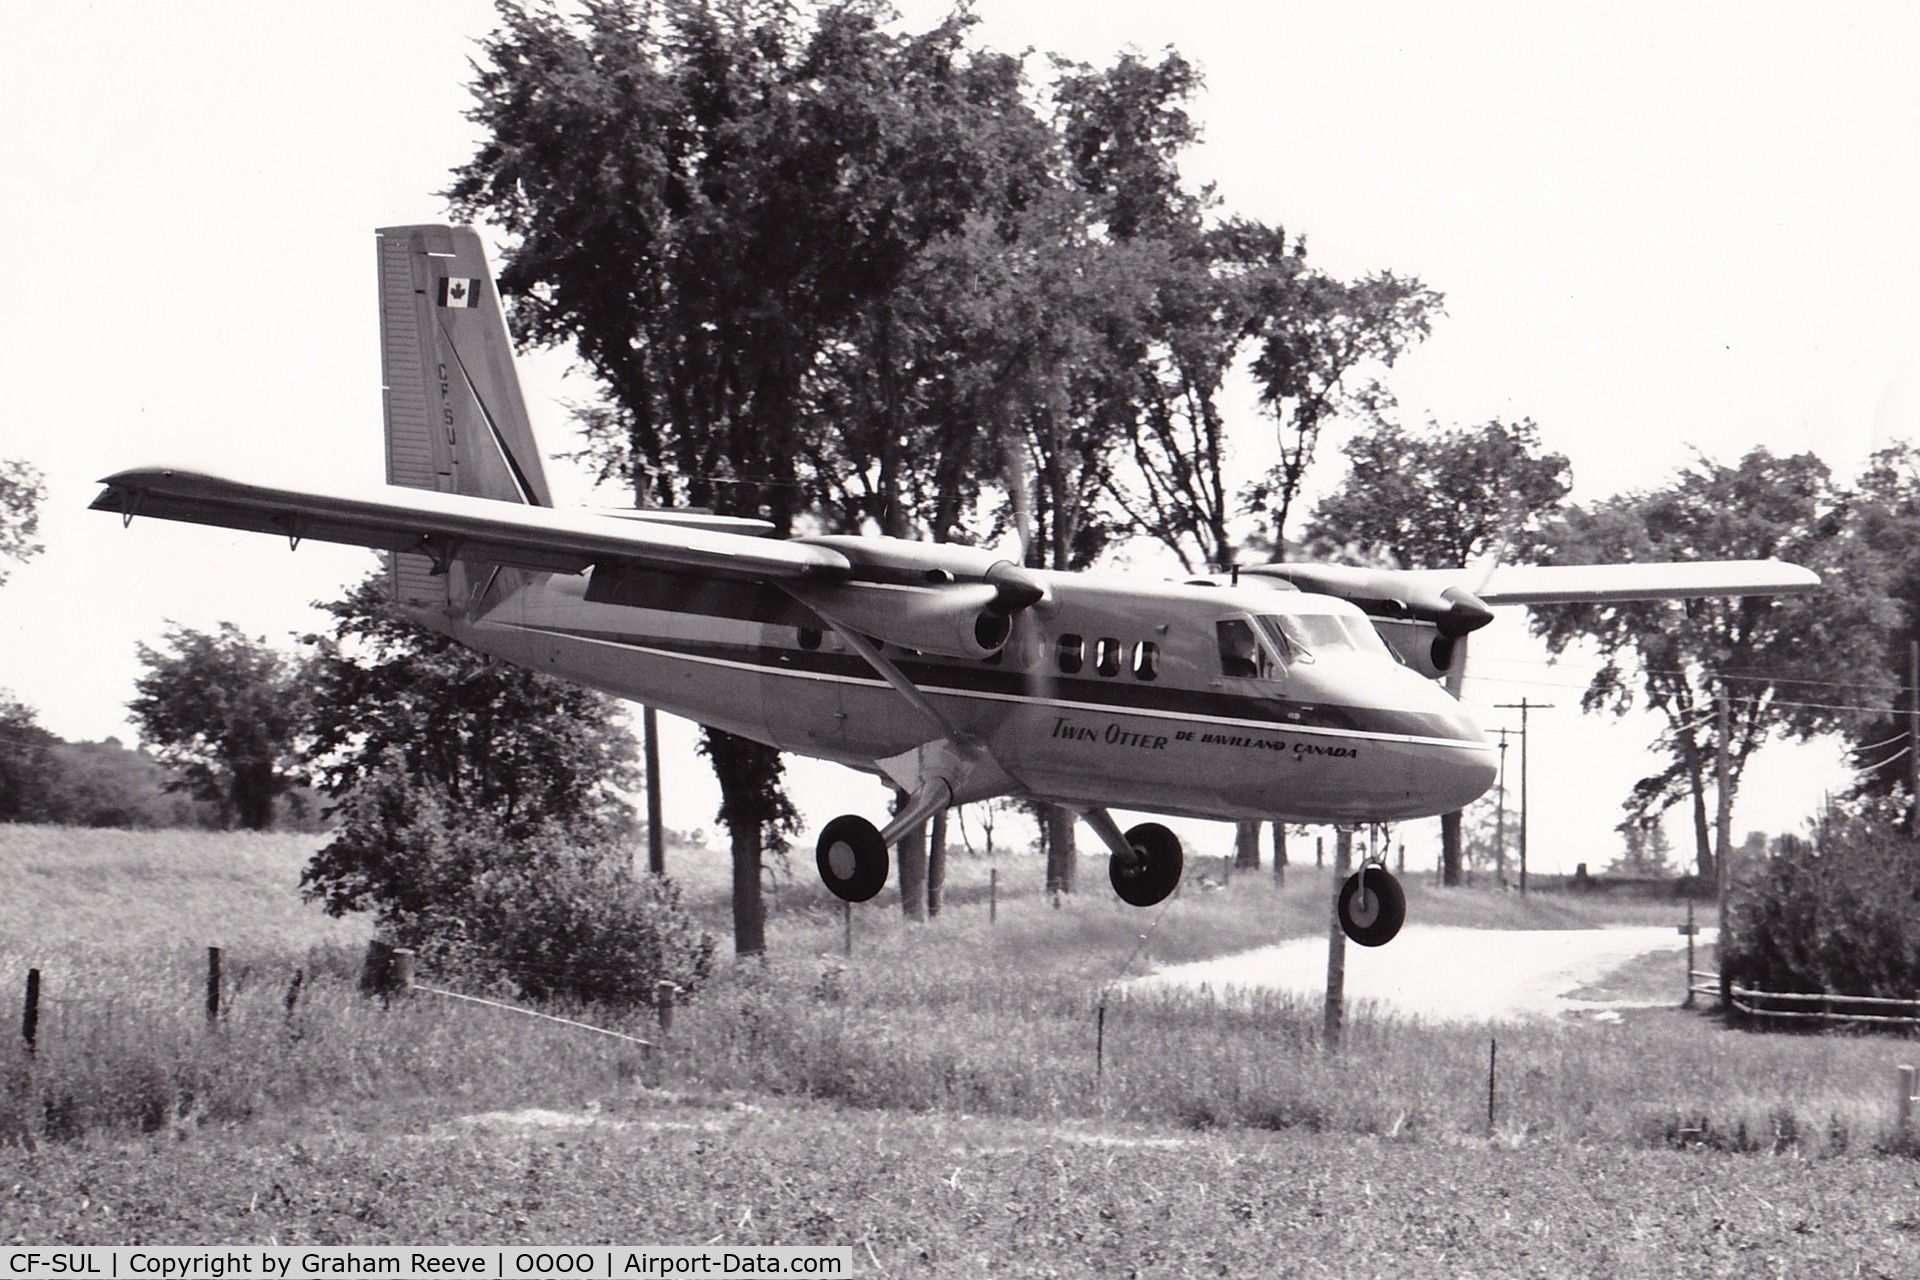 CF-SUL, 1965 De Havilland Canada DHC6-100 C/N Not found CF-SUL, Recently found picture so unable to give any information as to where and when.